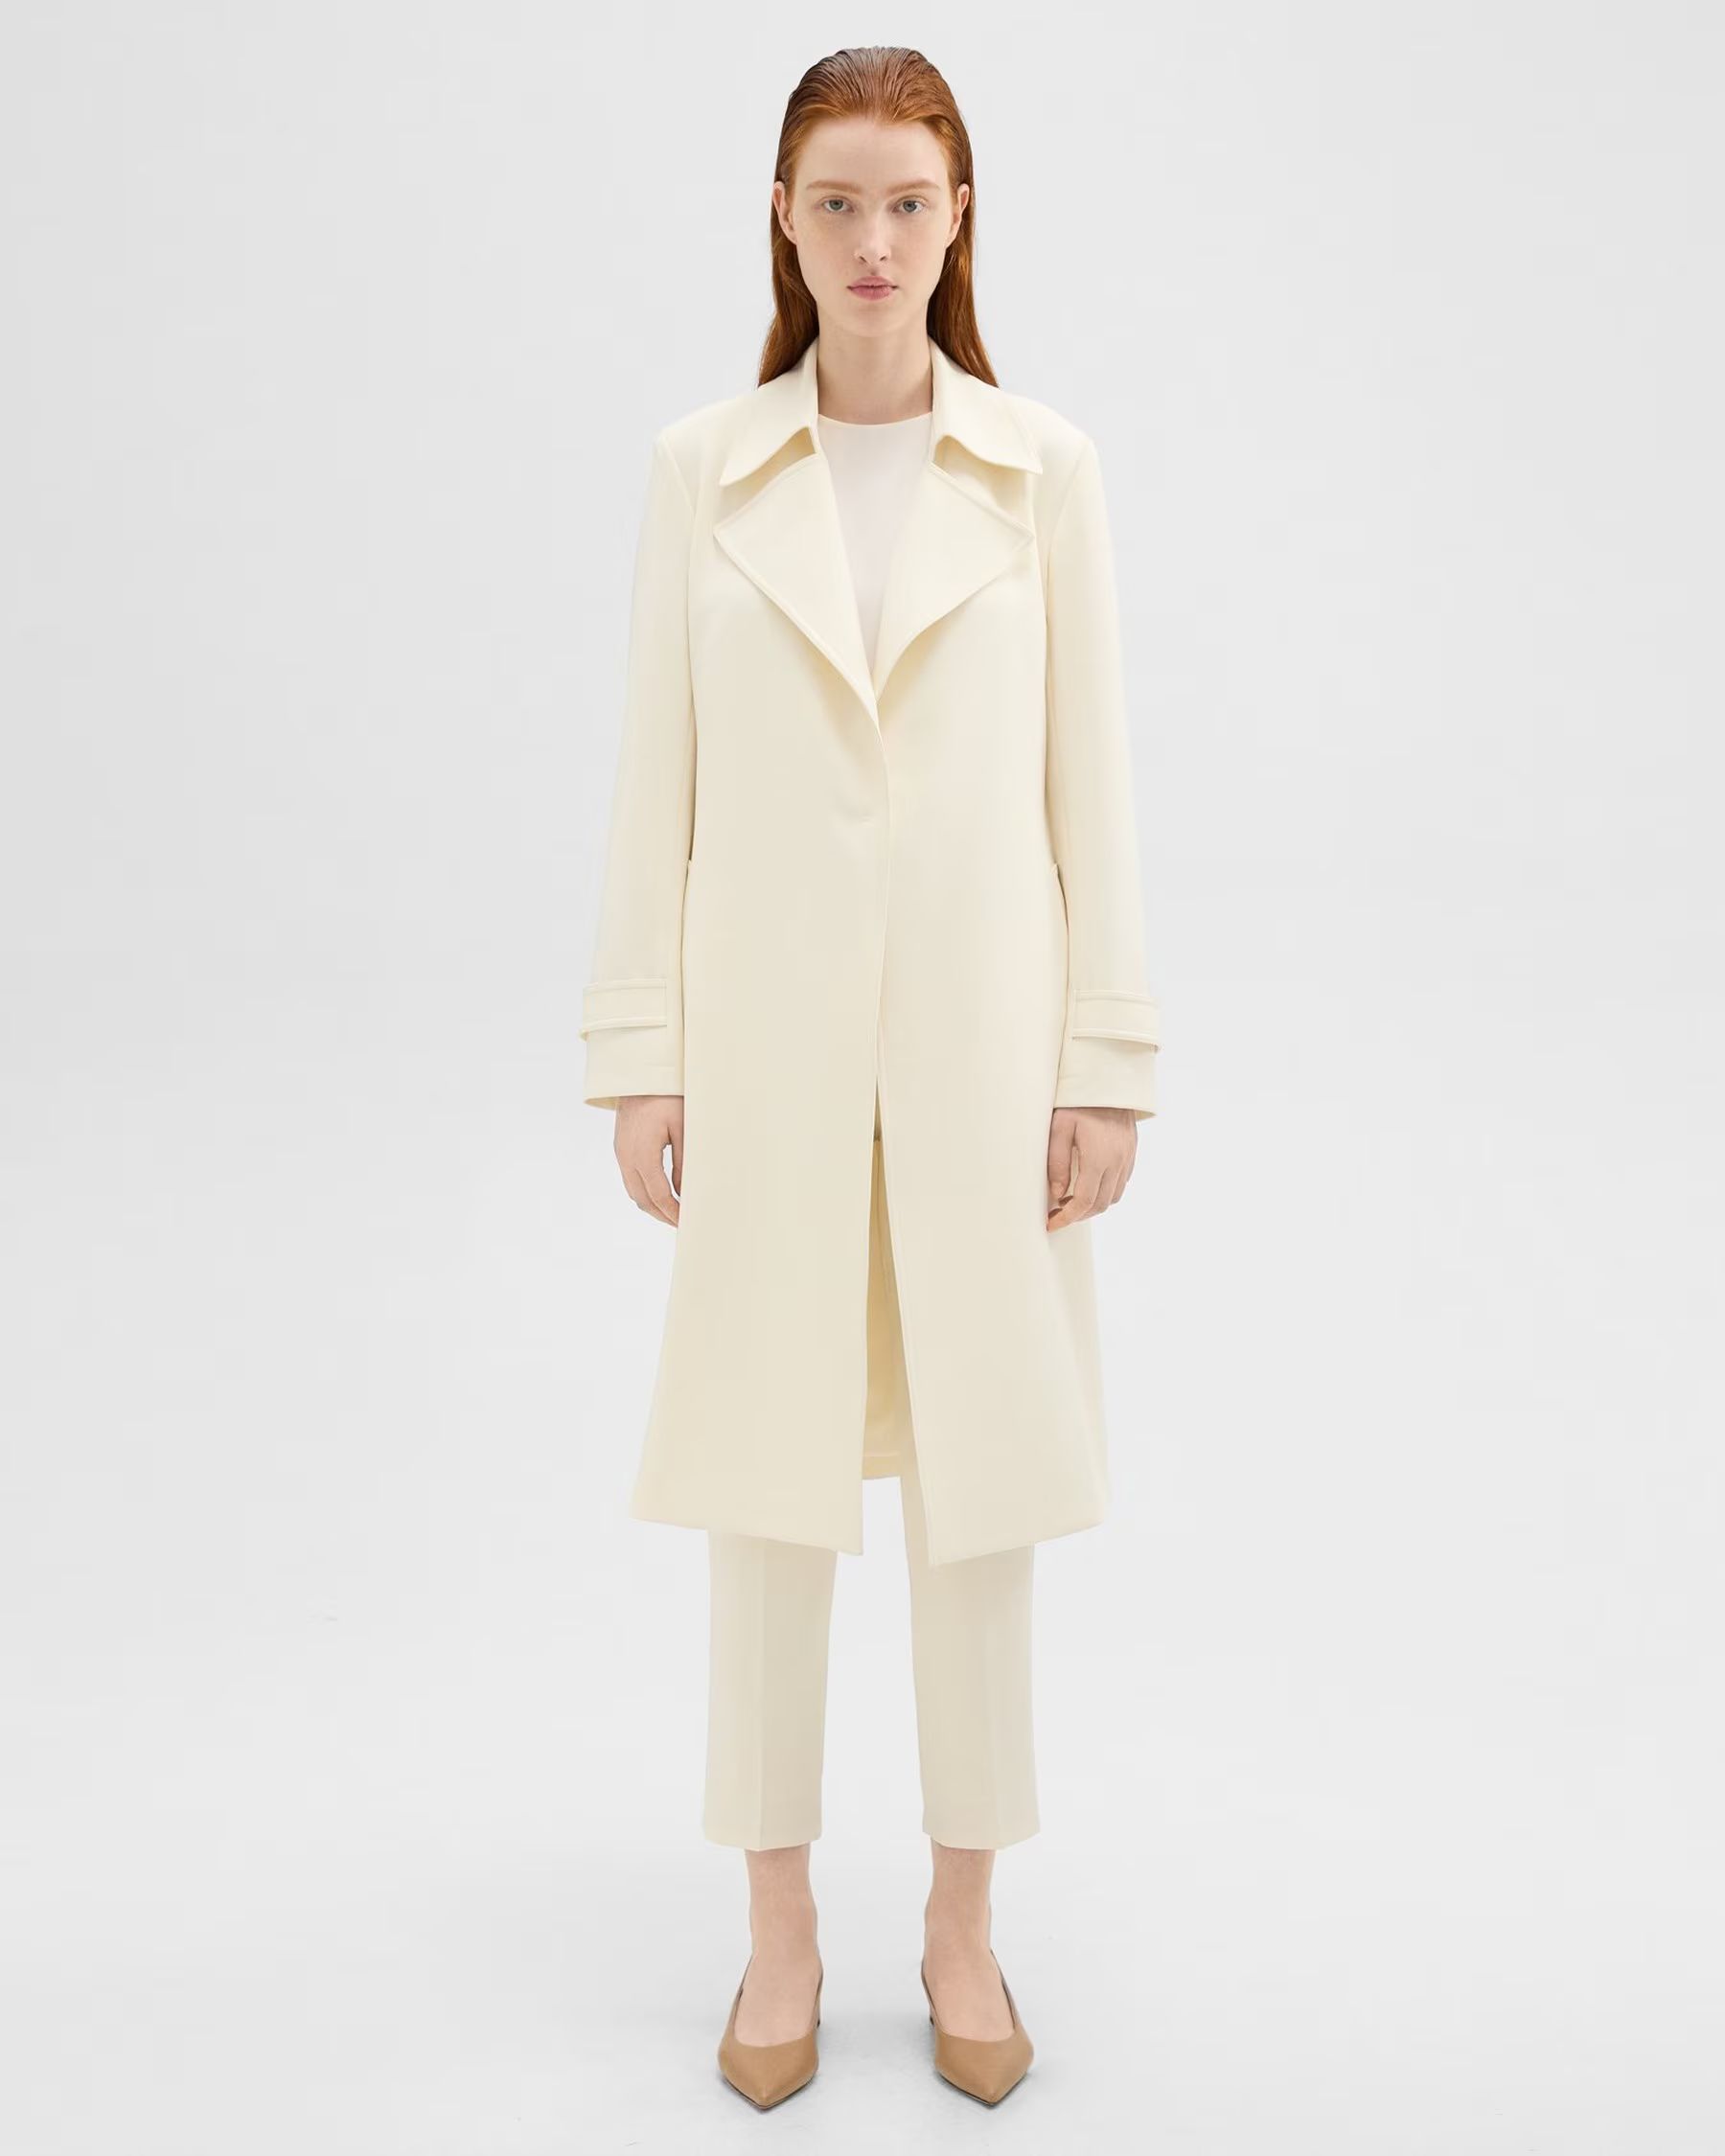 Oaklane Trench Coat in Crepe | Theory UK